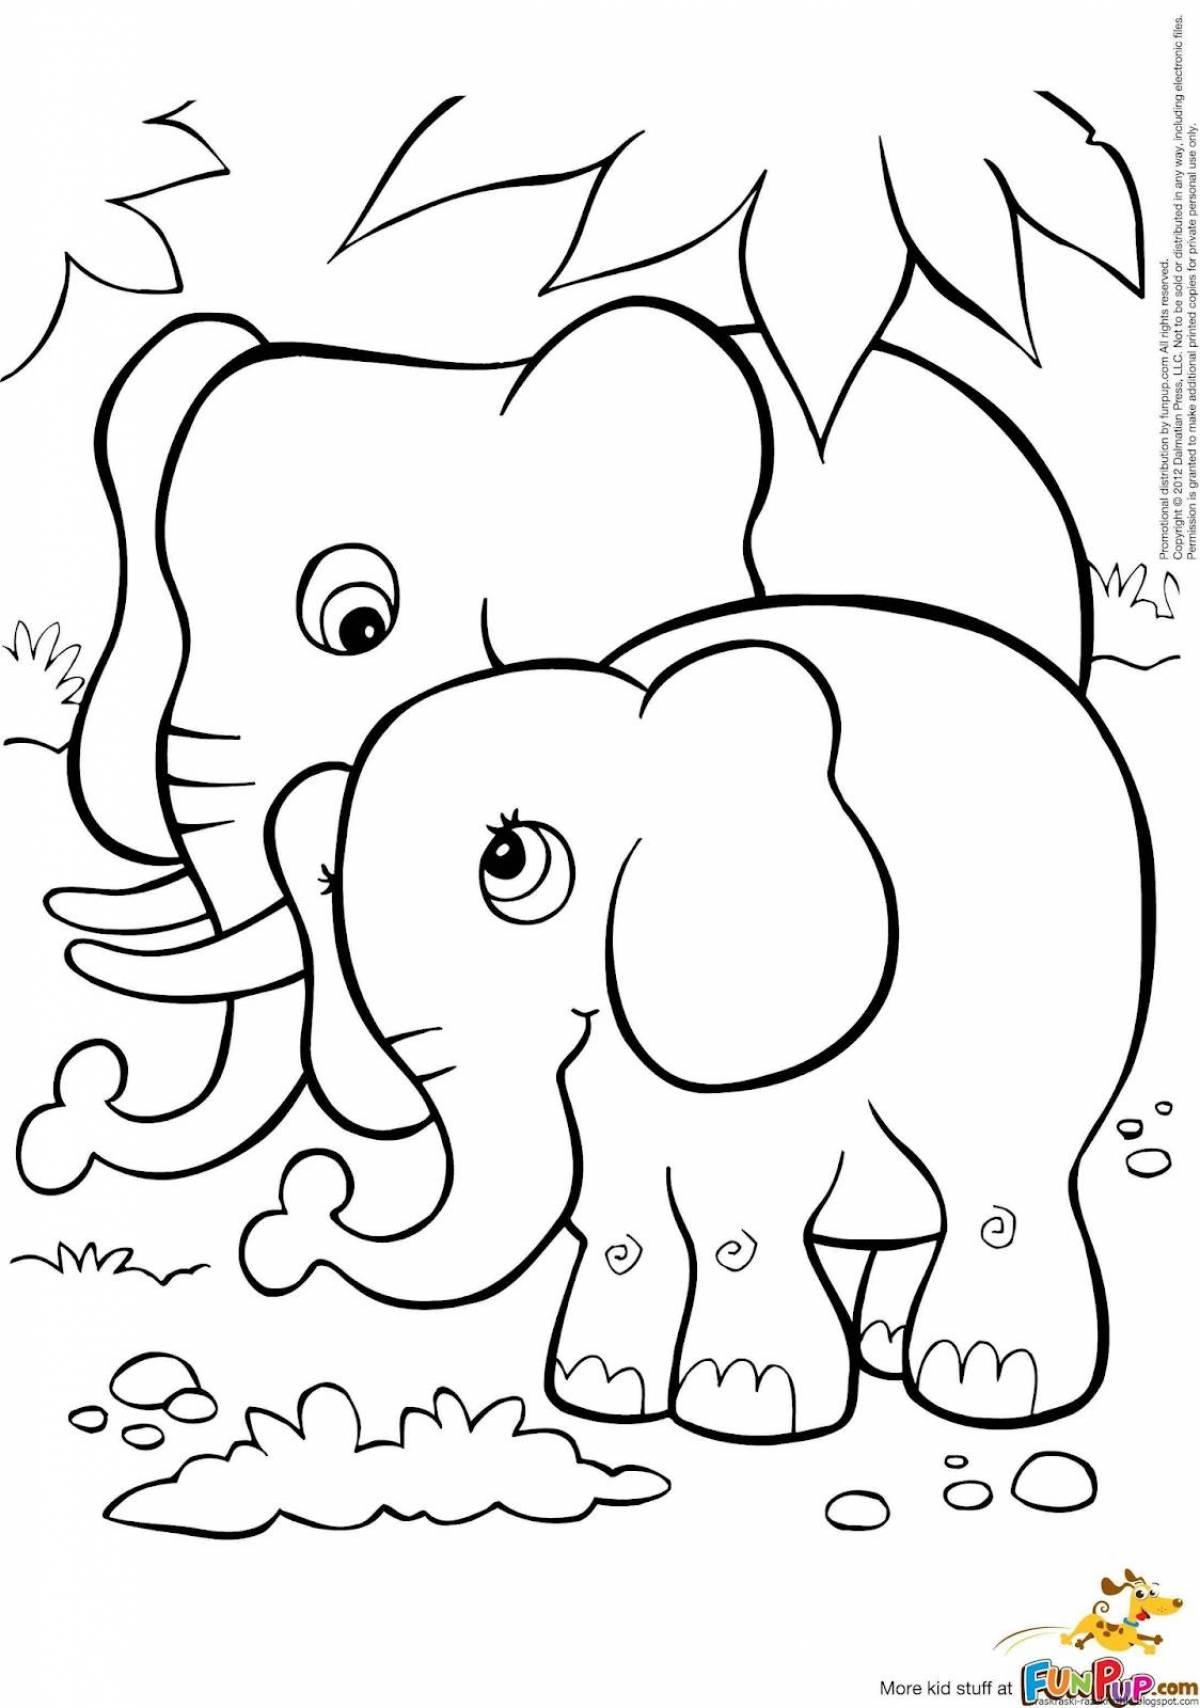 Majestic elephant coloring for kids